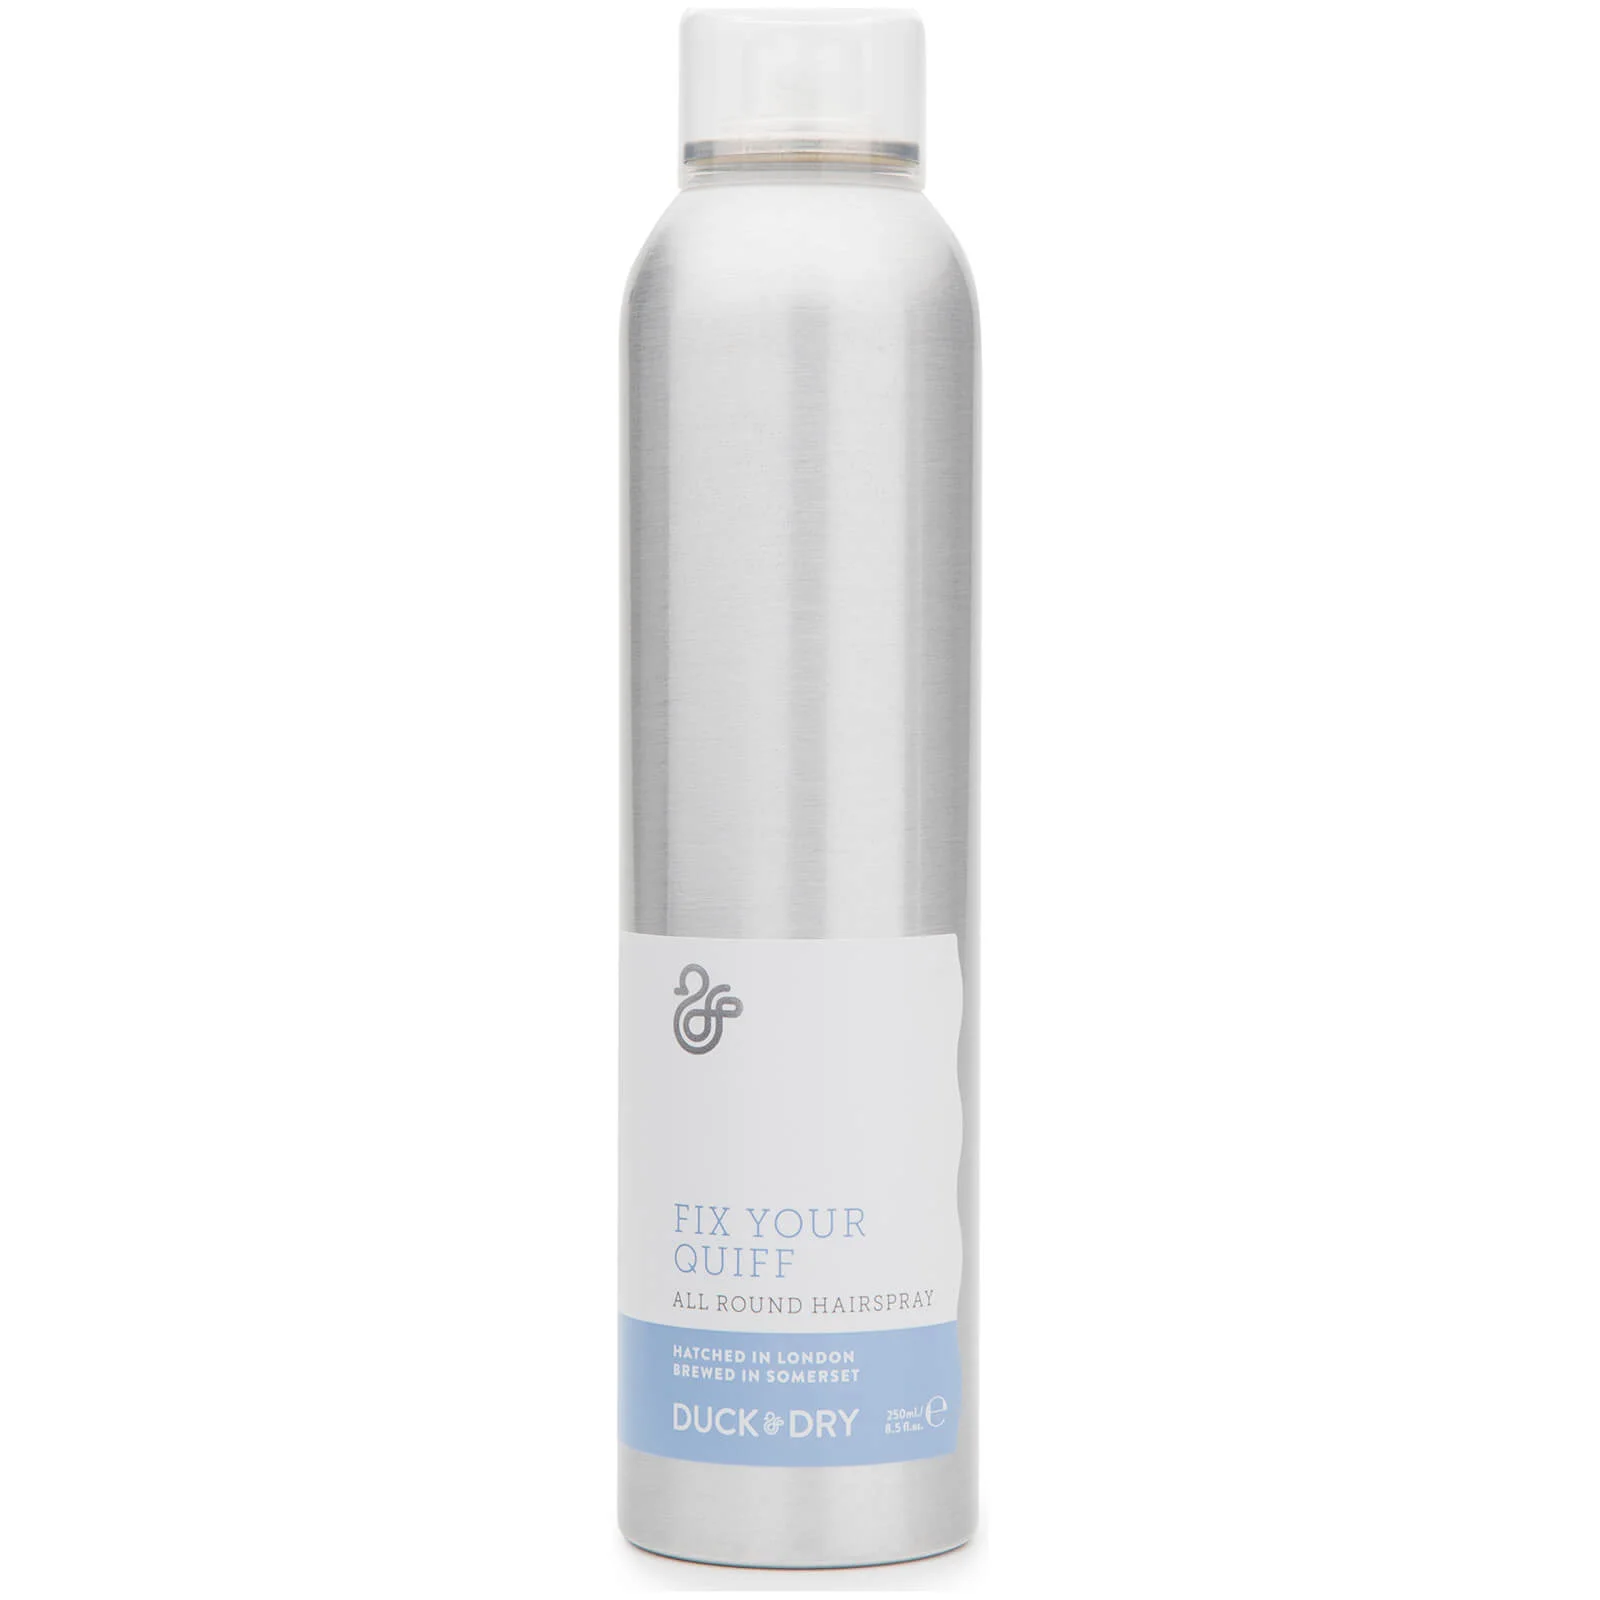 Duck & Dry Fix Your Quiff All Round Hairspray 250ml Image 1